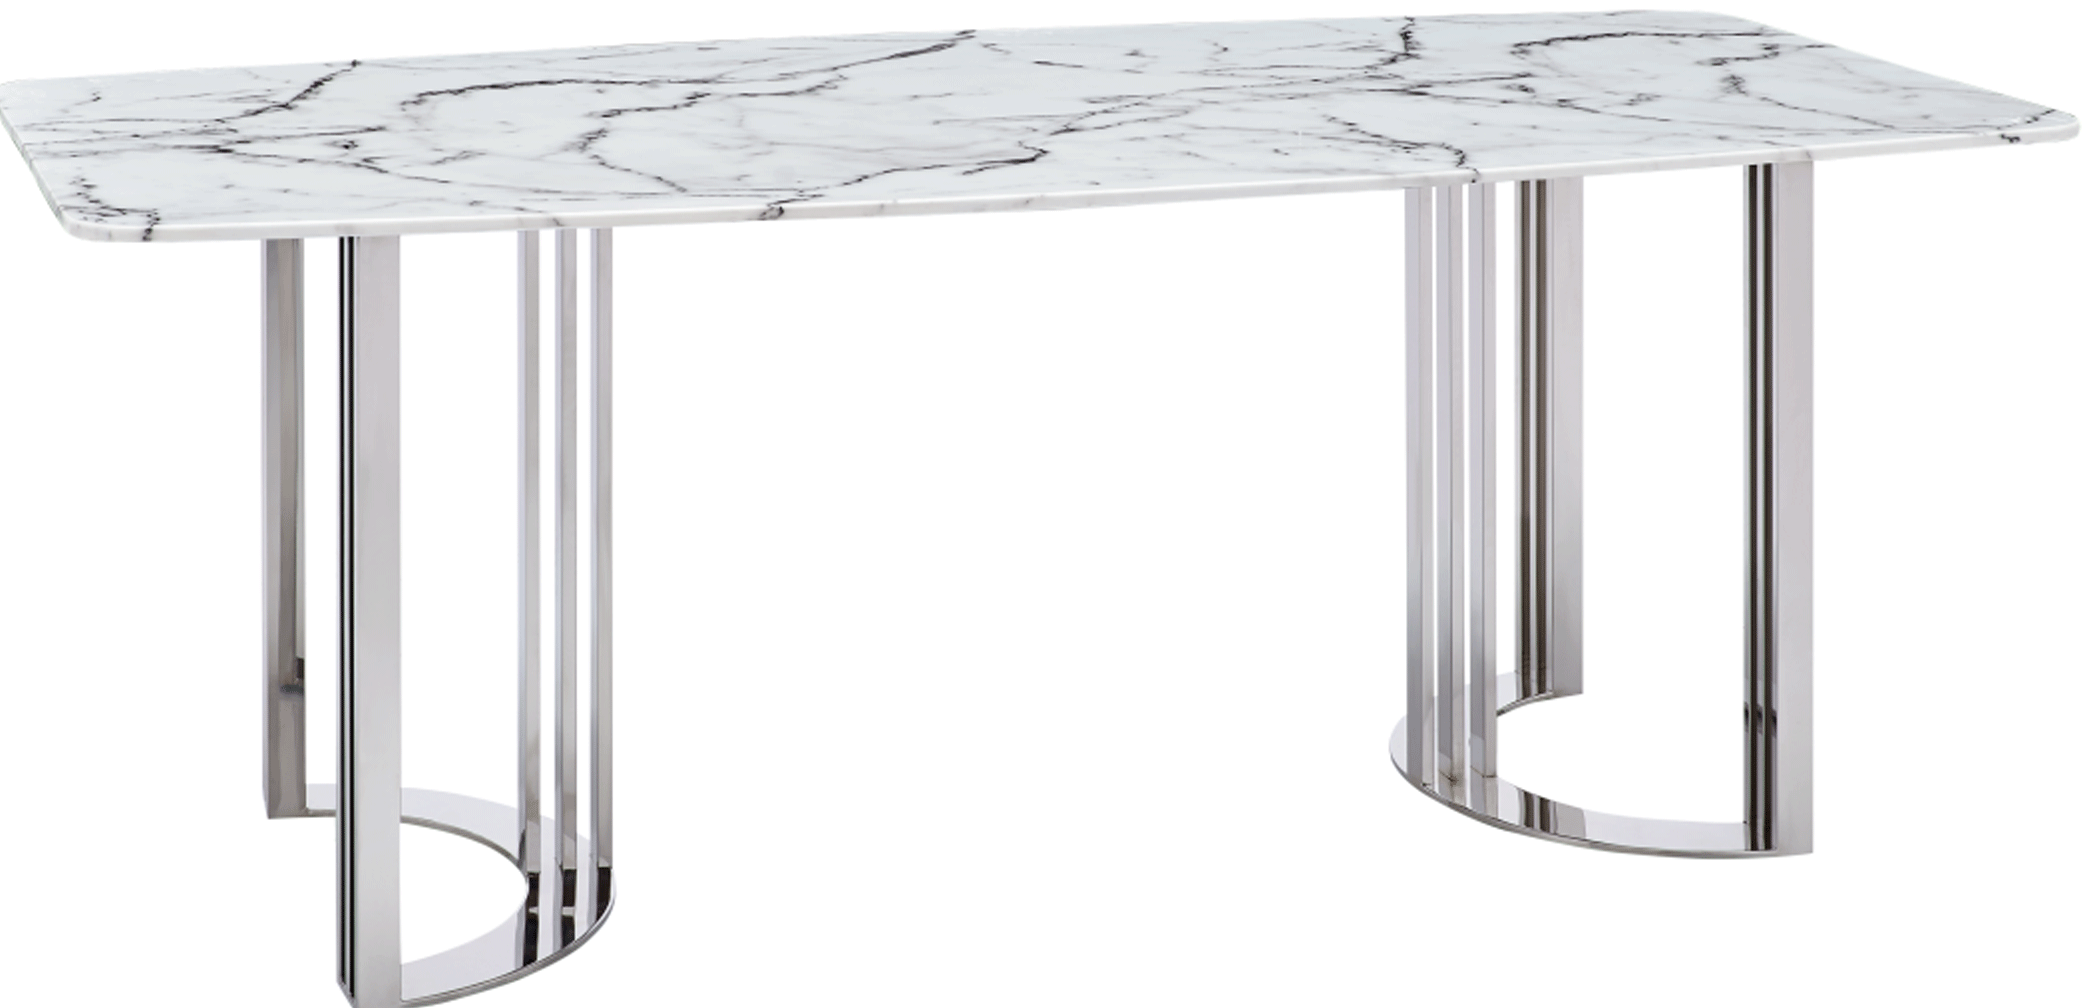 Wallunits Entertainment Centers 131 Silver Marble Dining Table